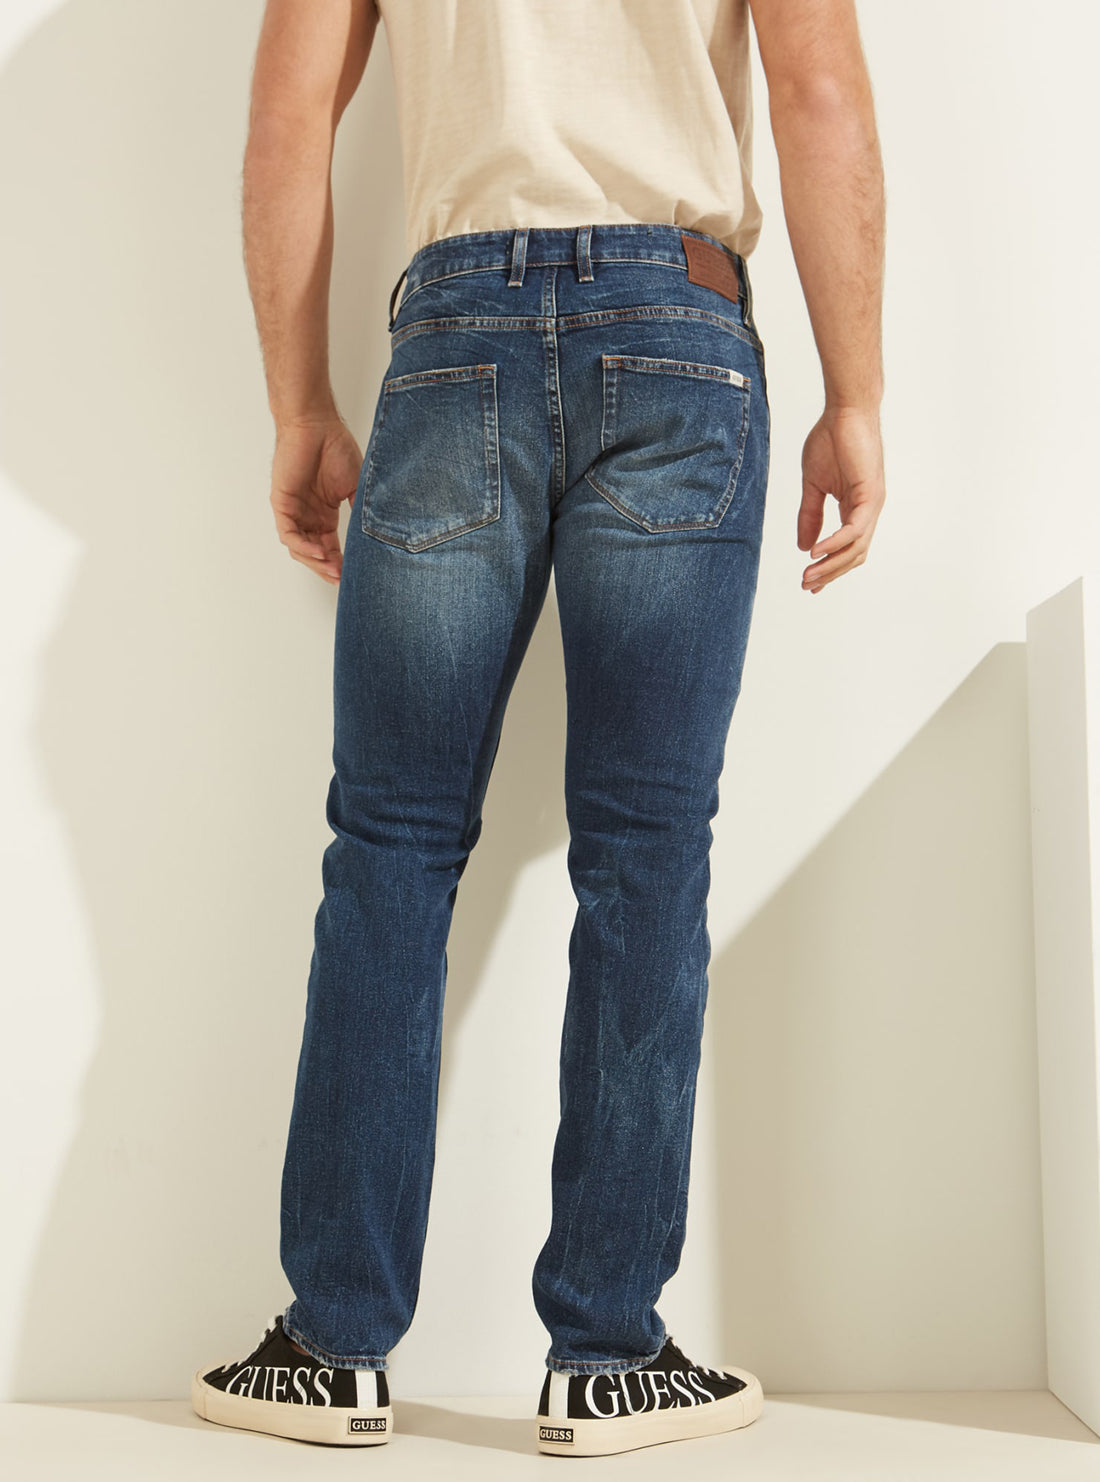 GUESS Mens Eco Mid-Rise Slim Tapered Denim Jeans in Antique Wash M0RAS2R47I1 Back Full View